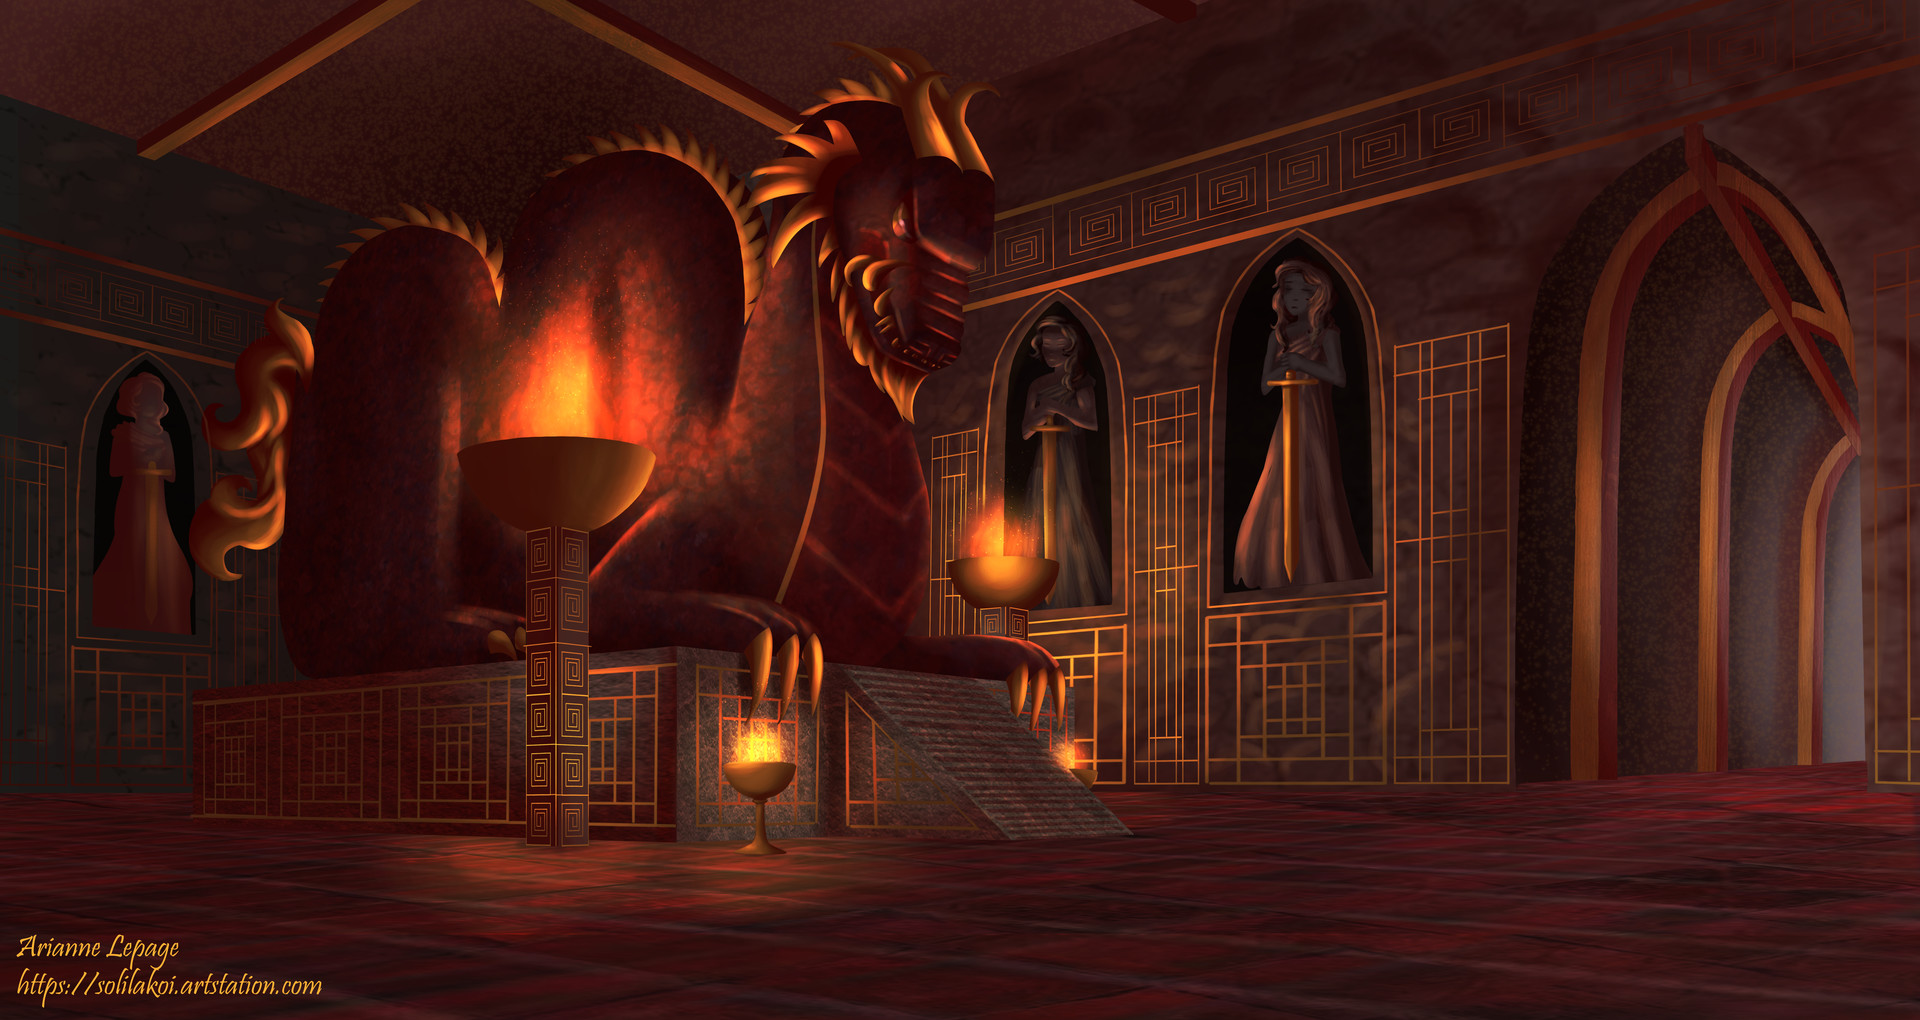 arianne-lepage-dragon-temple-repaint-signed.jpg